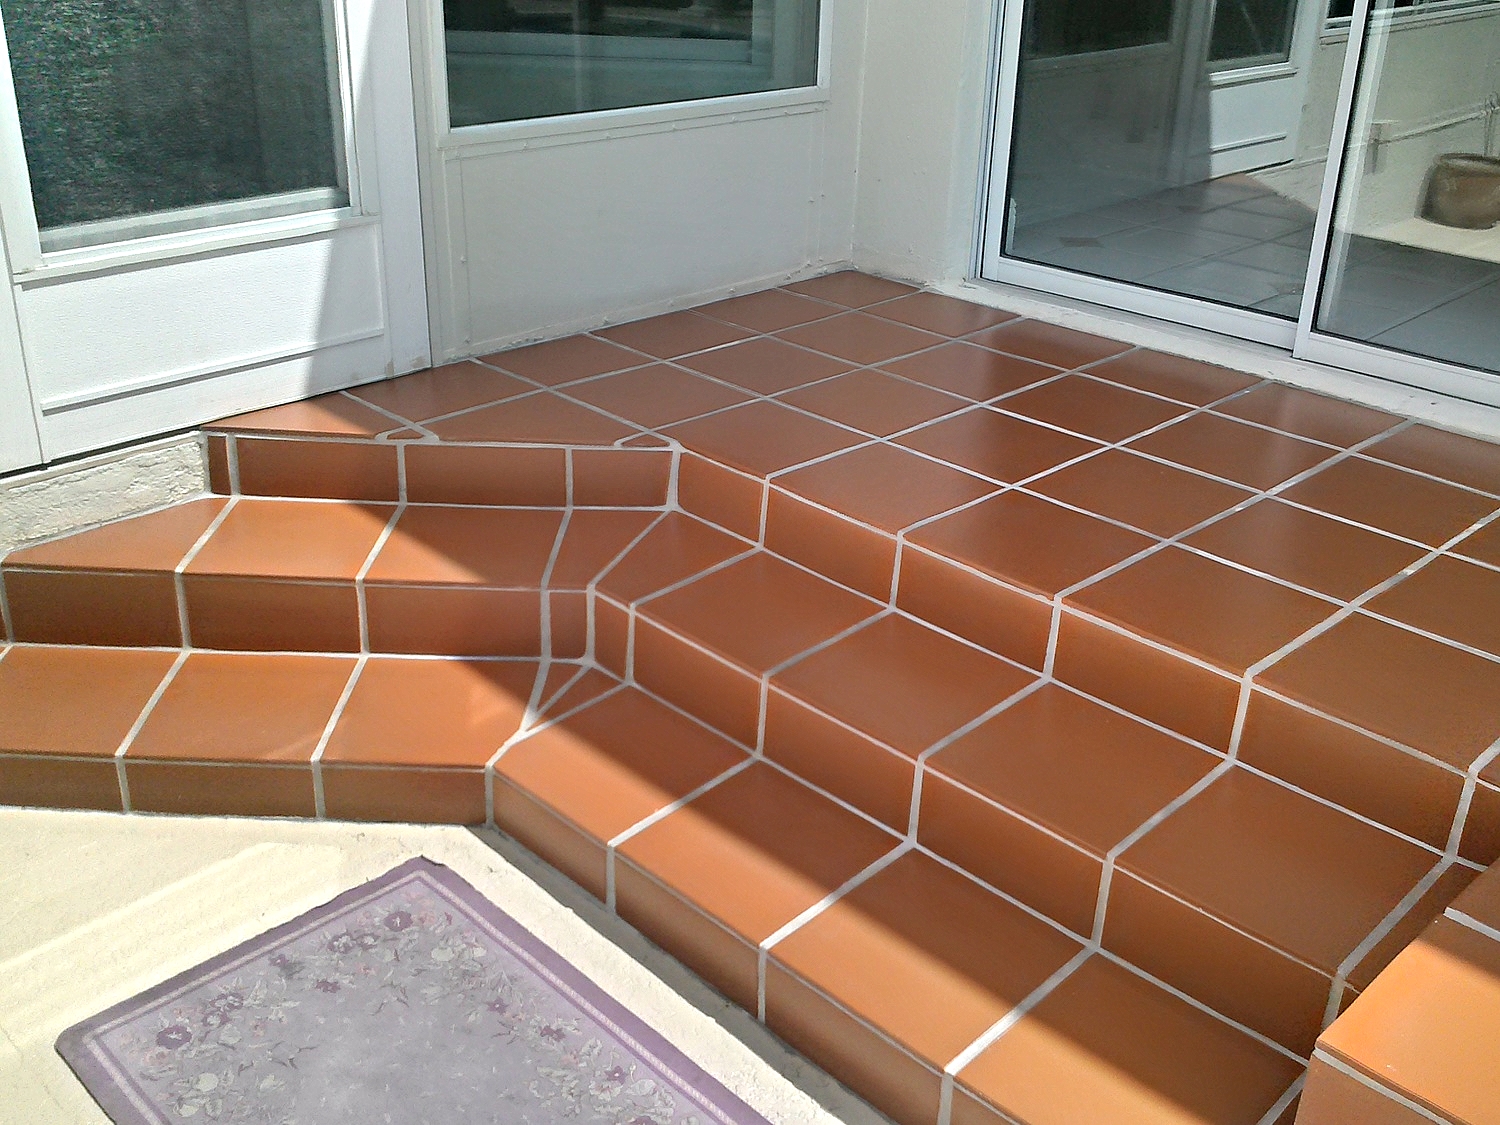 stair-tile-grout-after.jpg